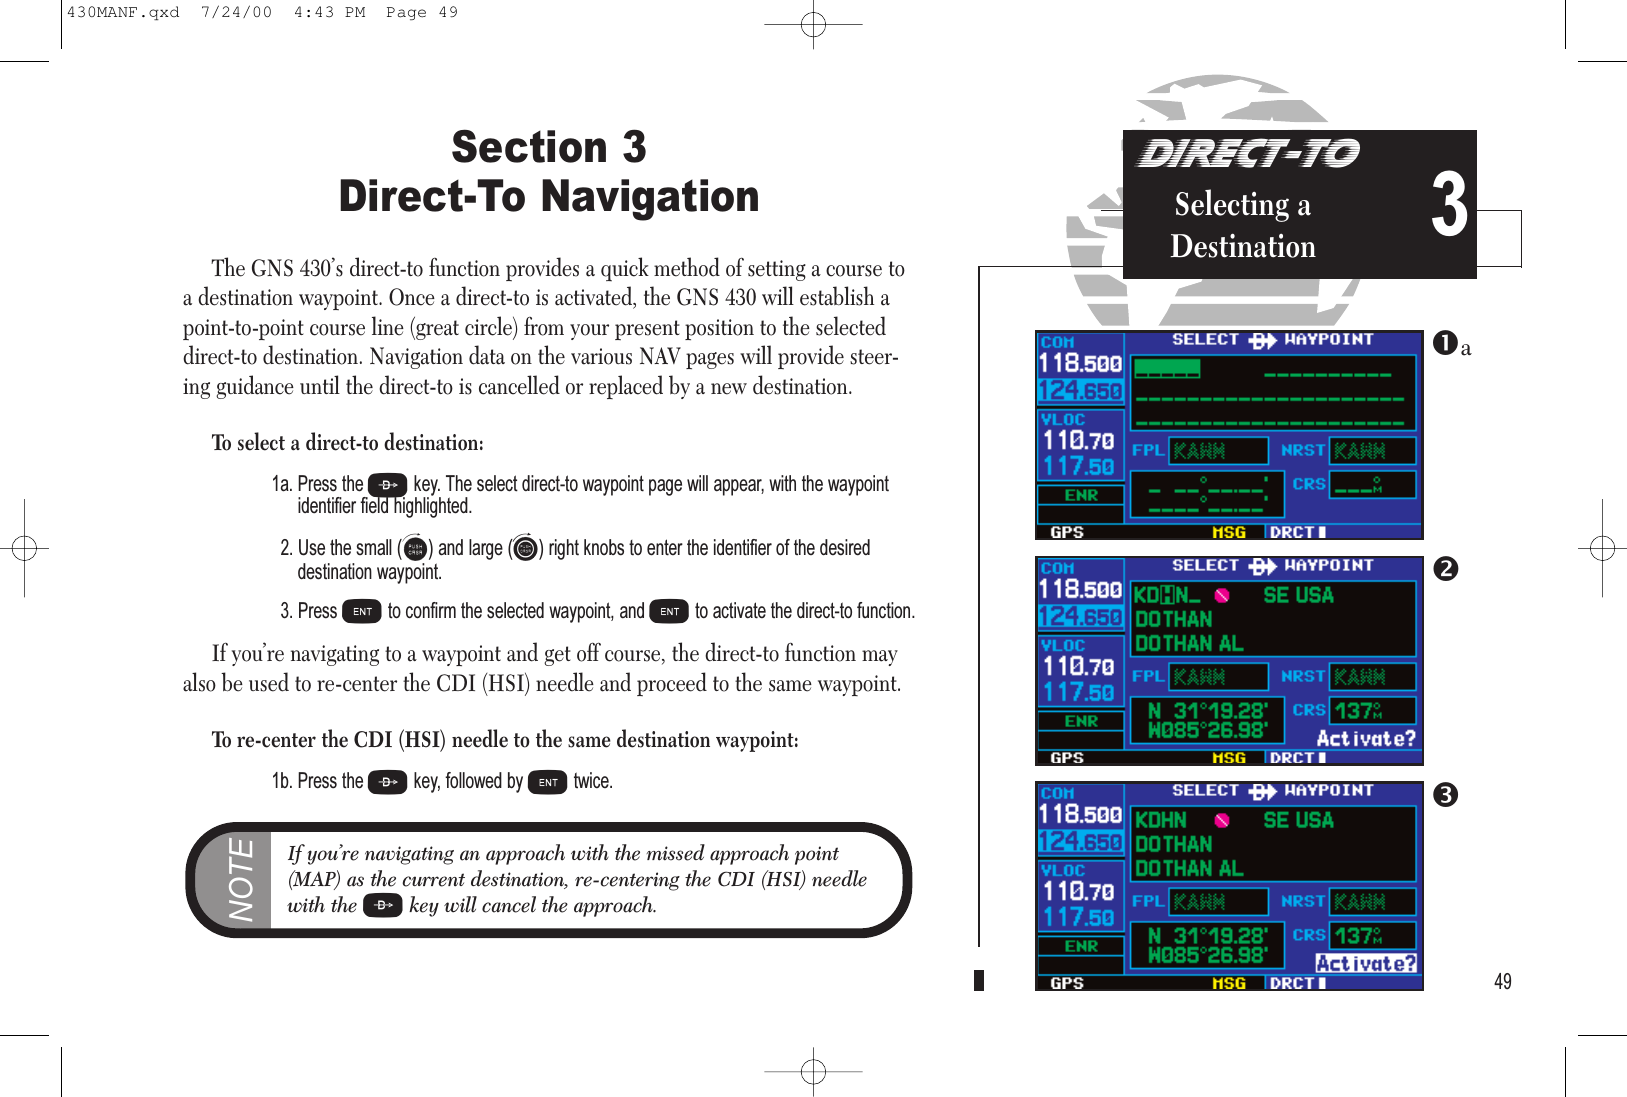 DIRECT-TOSelecting aDestination 3Section 3 Direct-To NavigationThe GNS 430’s direct-to function provides a quick method of setting a course toa destination waypoint. Once a direct-to is activated, the GNS 430 will establish apoint-to-point course line (great circle) from your present position to the selecteddirect-to destination. Navigation data on the various NAV pages will provide steer-ing guidance until the direct-to is cancelled or replaced by a new destination.To select a direct-to destination:1a. Press the Dkey. The select direct-to waypoint page will appear, with the waypoint identifier field highlighted.2. Use the small (a) and large (d) right knobs to enter the identifier of the desired destination waypoint.3. Press Eto confirm the selected waypoint, and Eto activate the direct-to function.If you’re navigating to a waypoint and get off course, the direct-to function mayalso be used to re-center the CDI (HSI) needle and proceed to the same waypoint.To re-center the CDI (HSI) needle to the same destination waypoint:1b. Press the Dkey, followed by Etwice.49NOTEIf you’re navigating an approach with the missed approach point(MAP) as the current destination, re-centering the CDI (HSI) needlewith the Dkey will cancel the approach.a430MANF.qxd  7/24/00  4:43 PM  Page 49